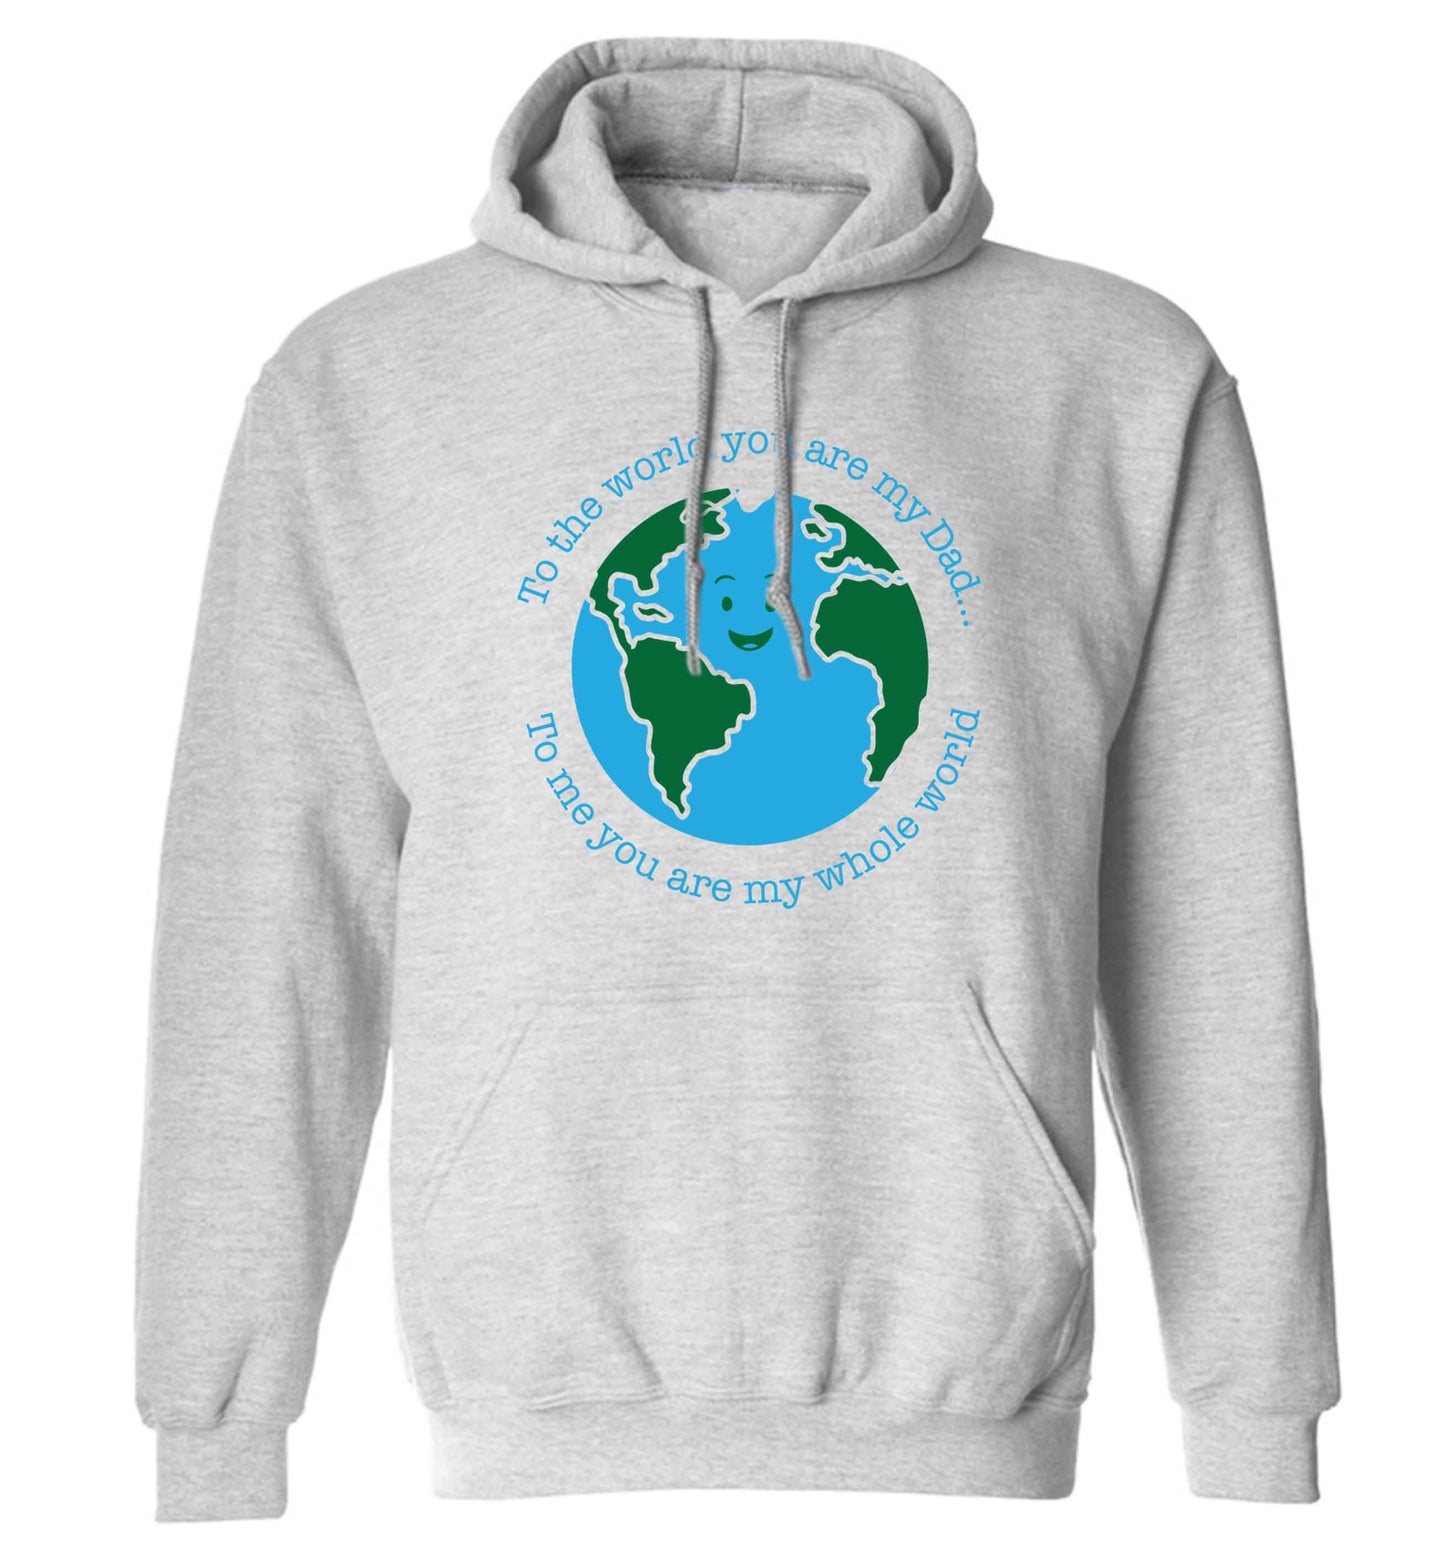 To the world you are my dad, to me you are my whole world adults unisex grey hoodie 2XL